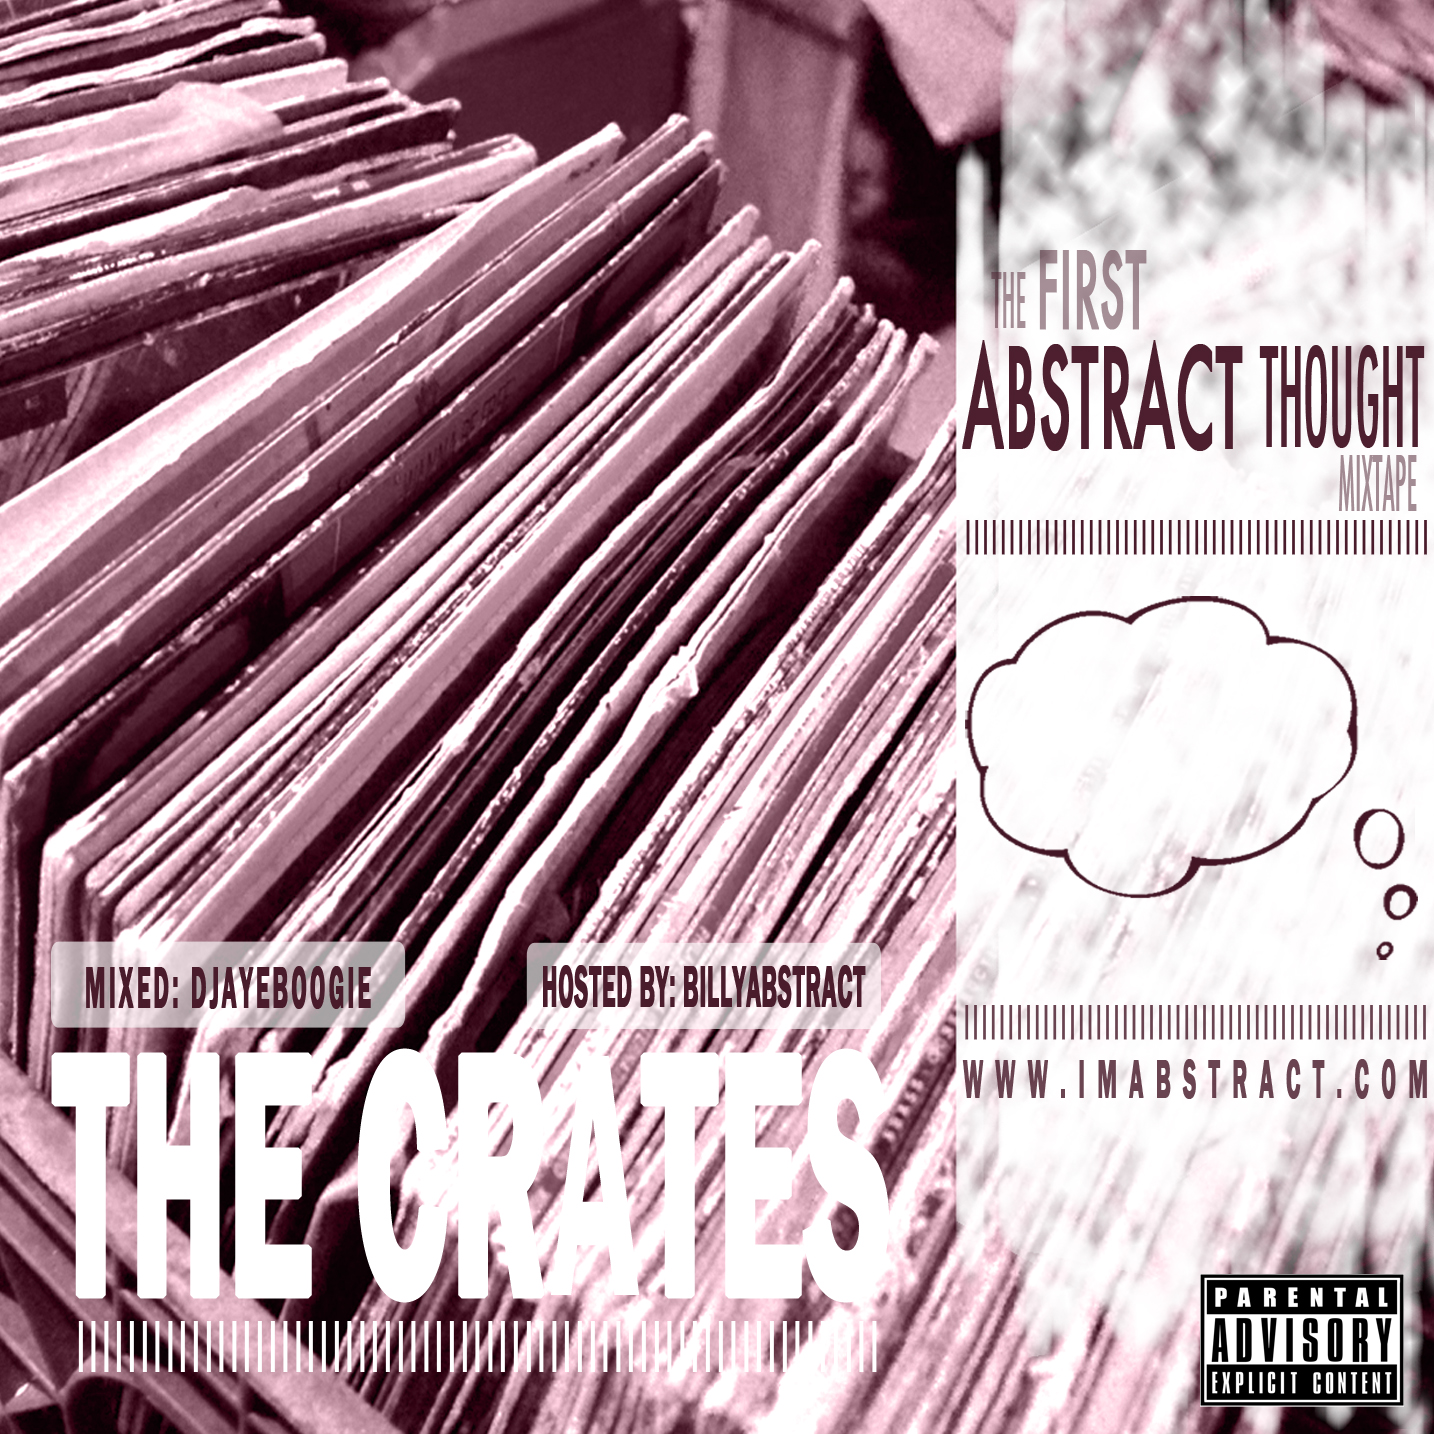 abstract-thought-alwaysabstract-the-crates-mixtape-hosted-by-billyabstract-djayeboogie-2012 Abstract Thought (alwaysABSTRACT) - The Crates (Mixtape) (Hosted by @BillyABSTRACT & @DjAYEboogie)  